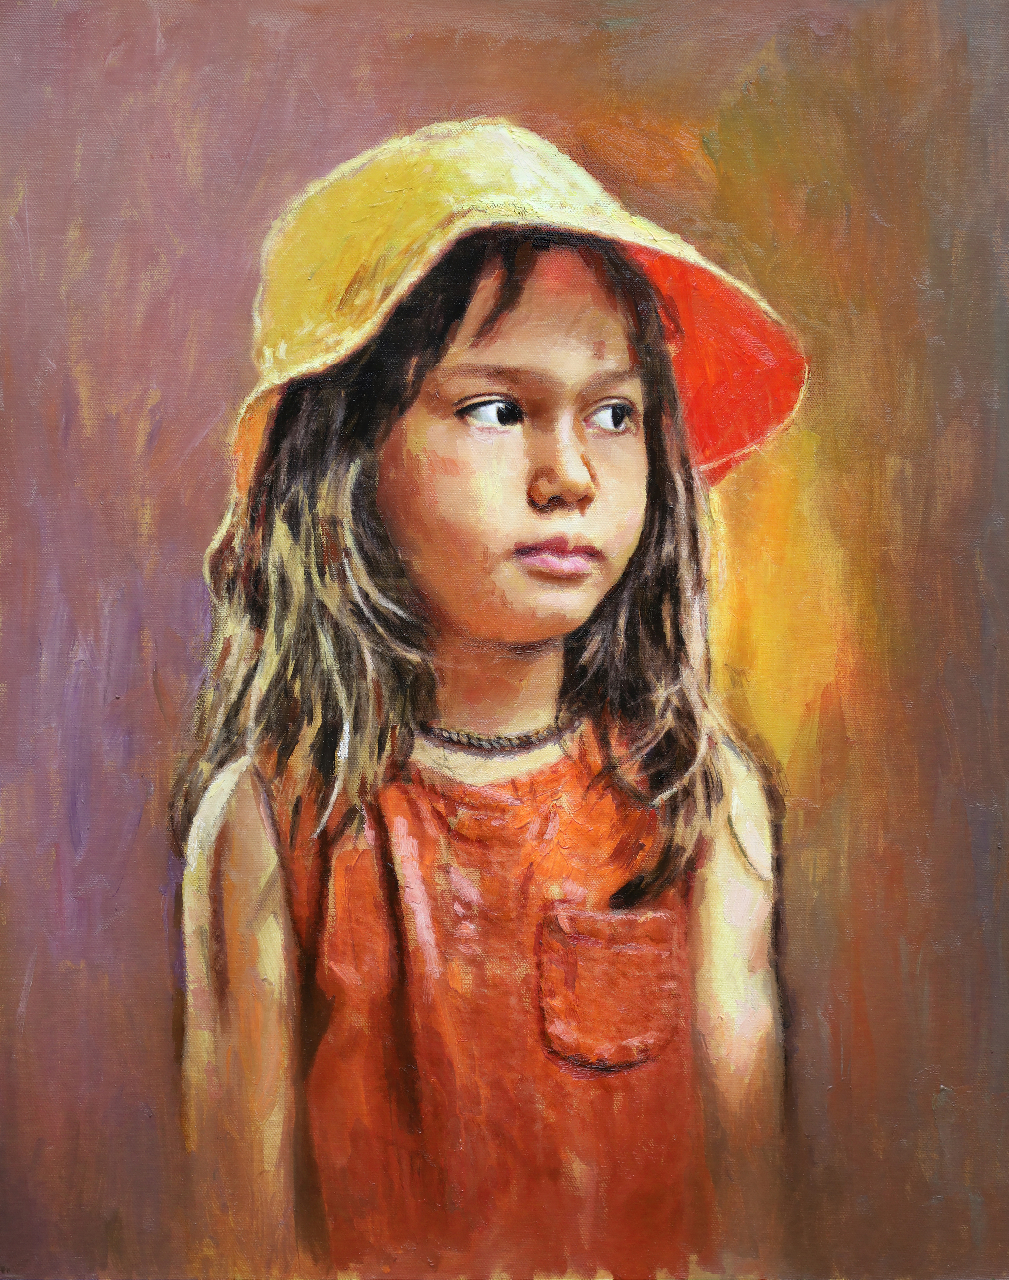 &ldquo;Portrait Painting in Oils of Emilie #5 by Dad&rdquo;